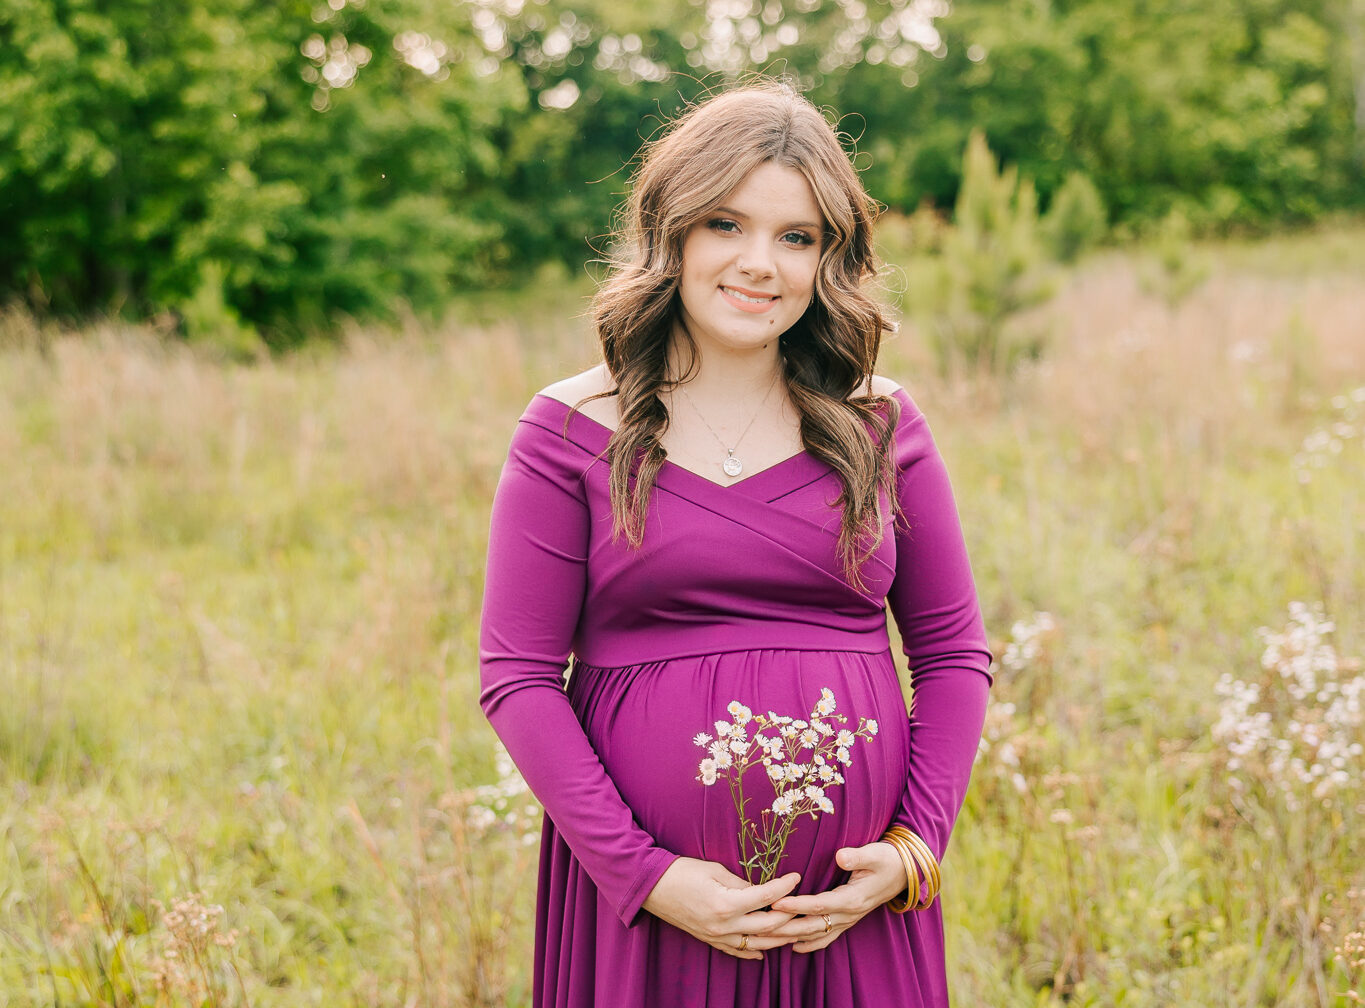 Soon to be mom carrying her sweet baby boy during her maternity portraits with molly berry photography.